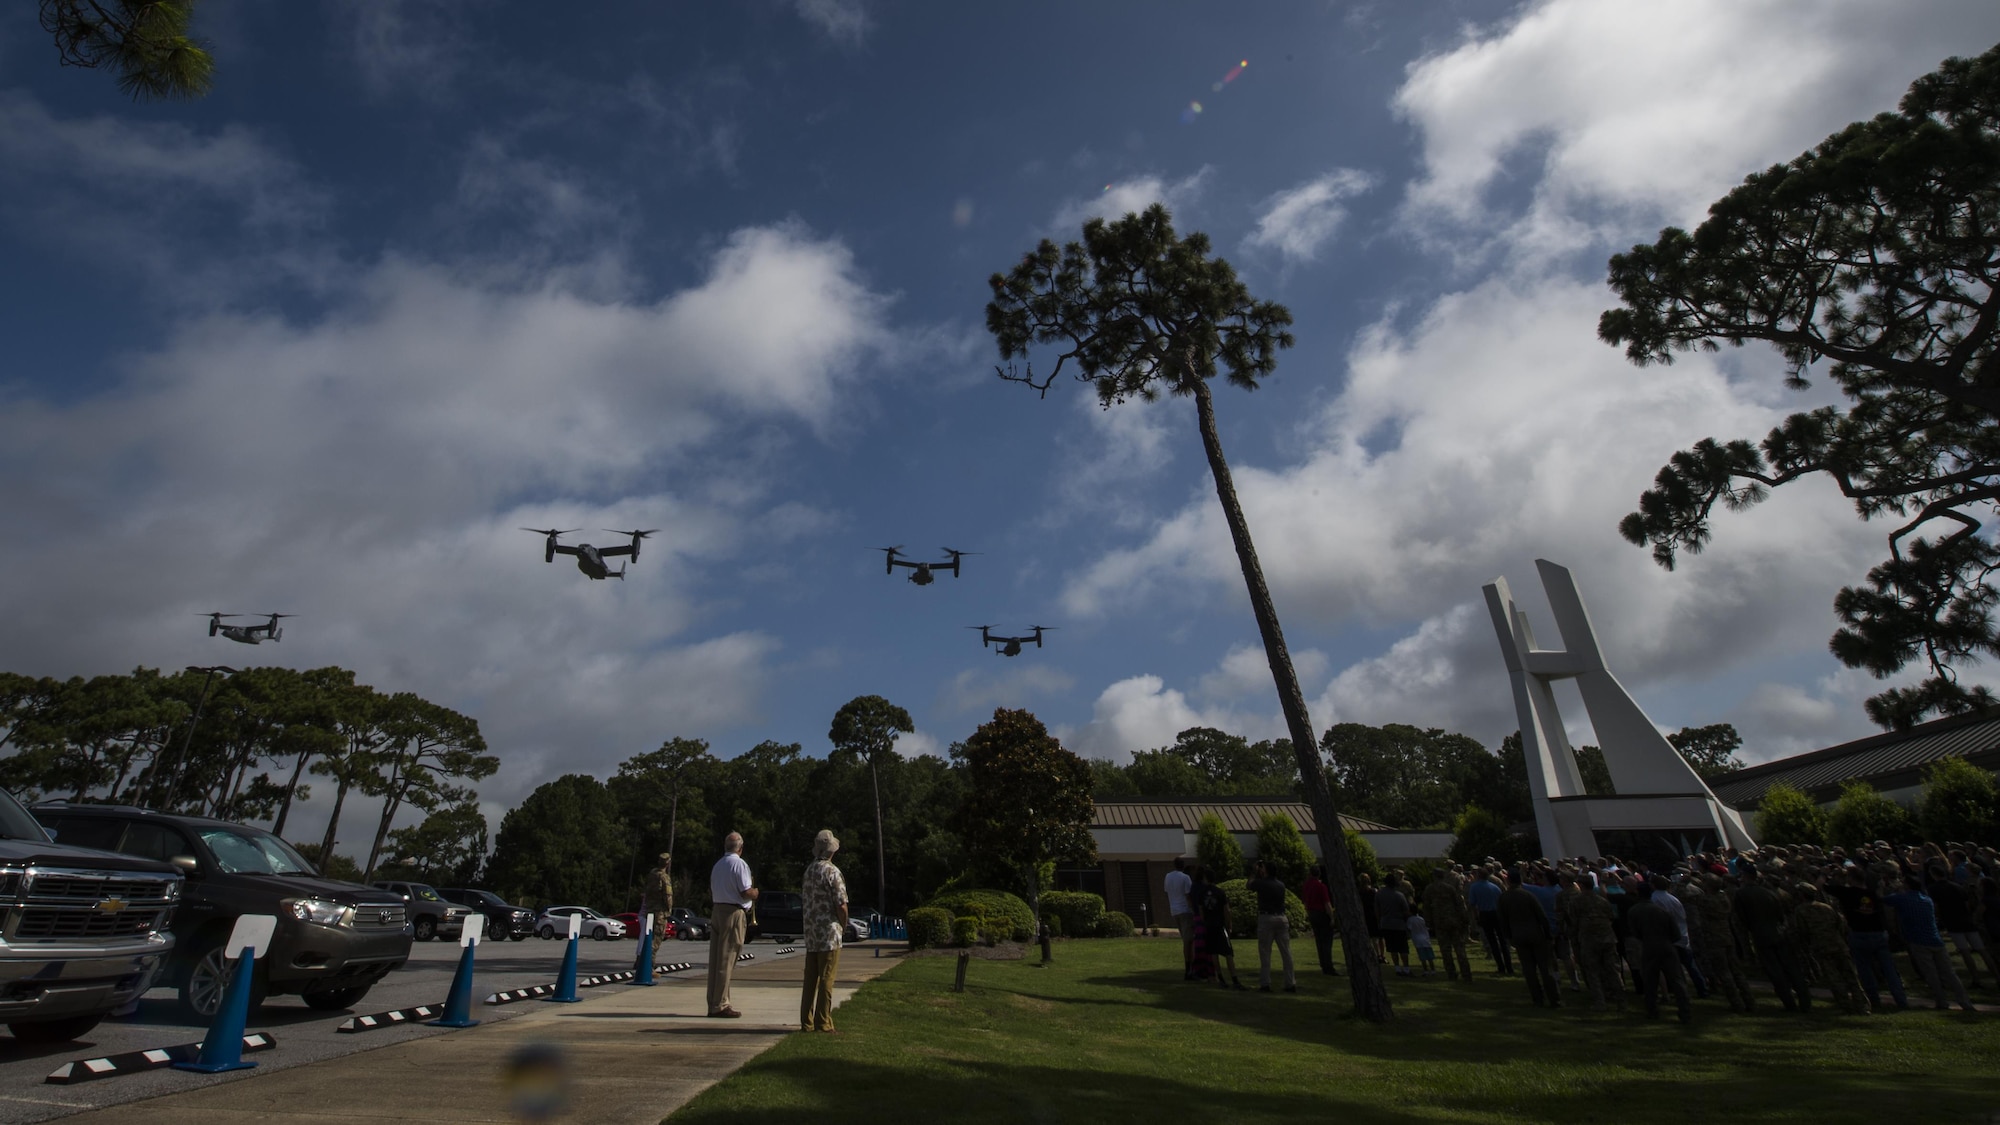 Four CV-22 Osprey tiltrotor aircraft from the 8th Special Operations Squadron fly over during the Operation Eagle Claw memorial ceremony at Hurlburt Field, Fla., June 23, 2017. Operation Eagle Claw was an attempted rescue mission on April 24, 1980, into Iran to liberate more than 50 American hostages captured after a group of radicals took over the American embassy in Tehran, Nov. 4, 1979. (U.S. Air Force photo by Airman 1st Class Joseph Pick)